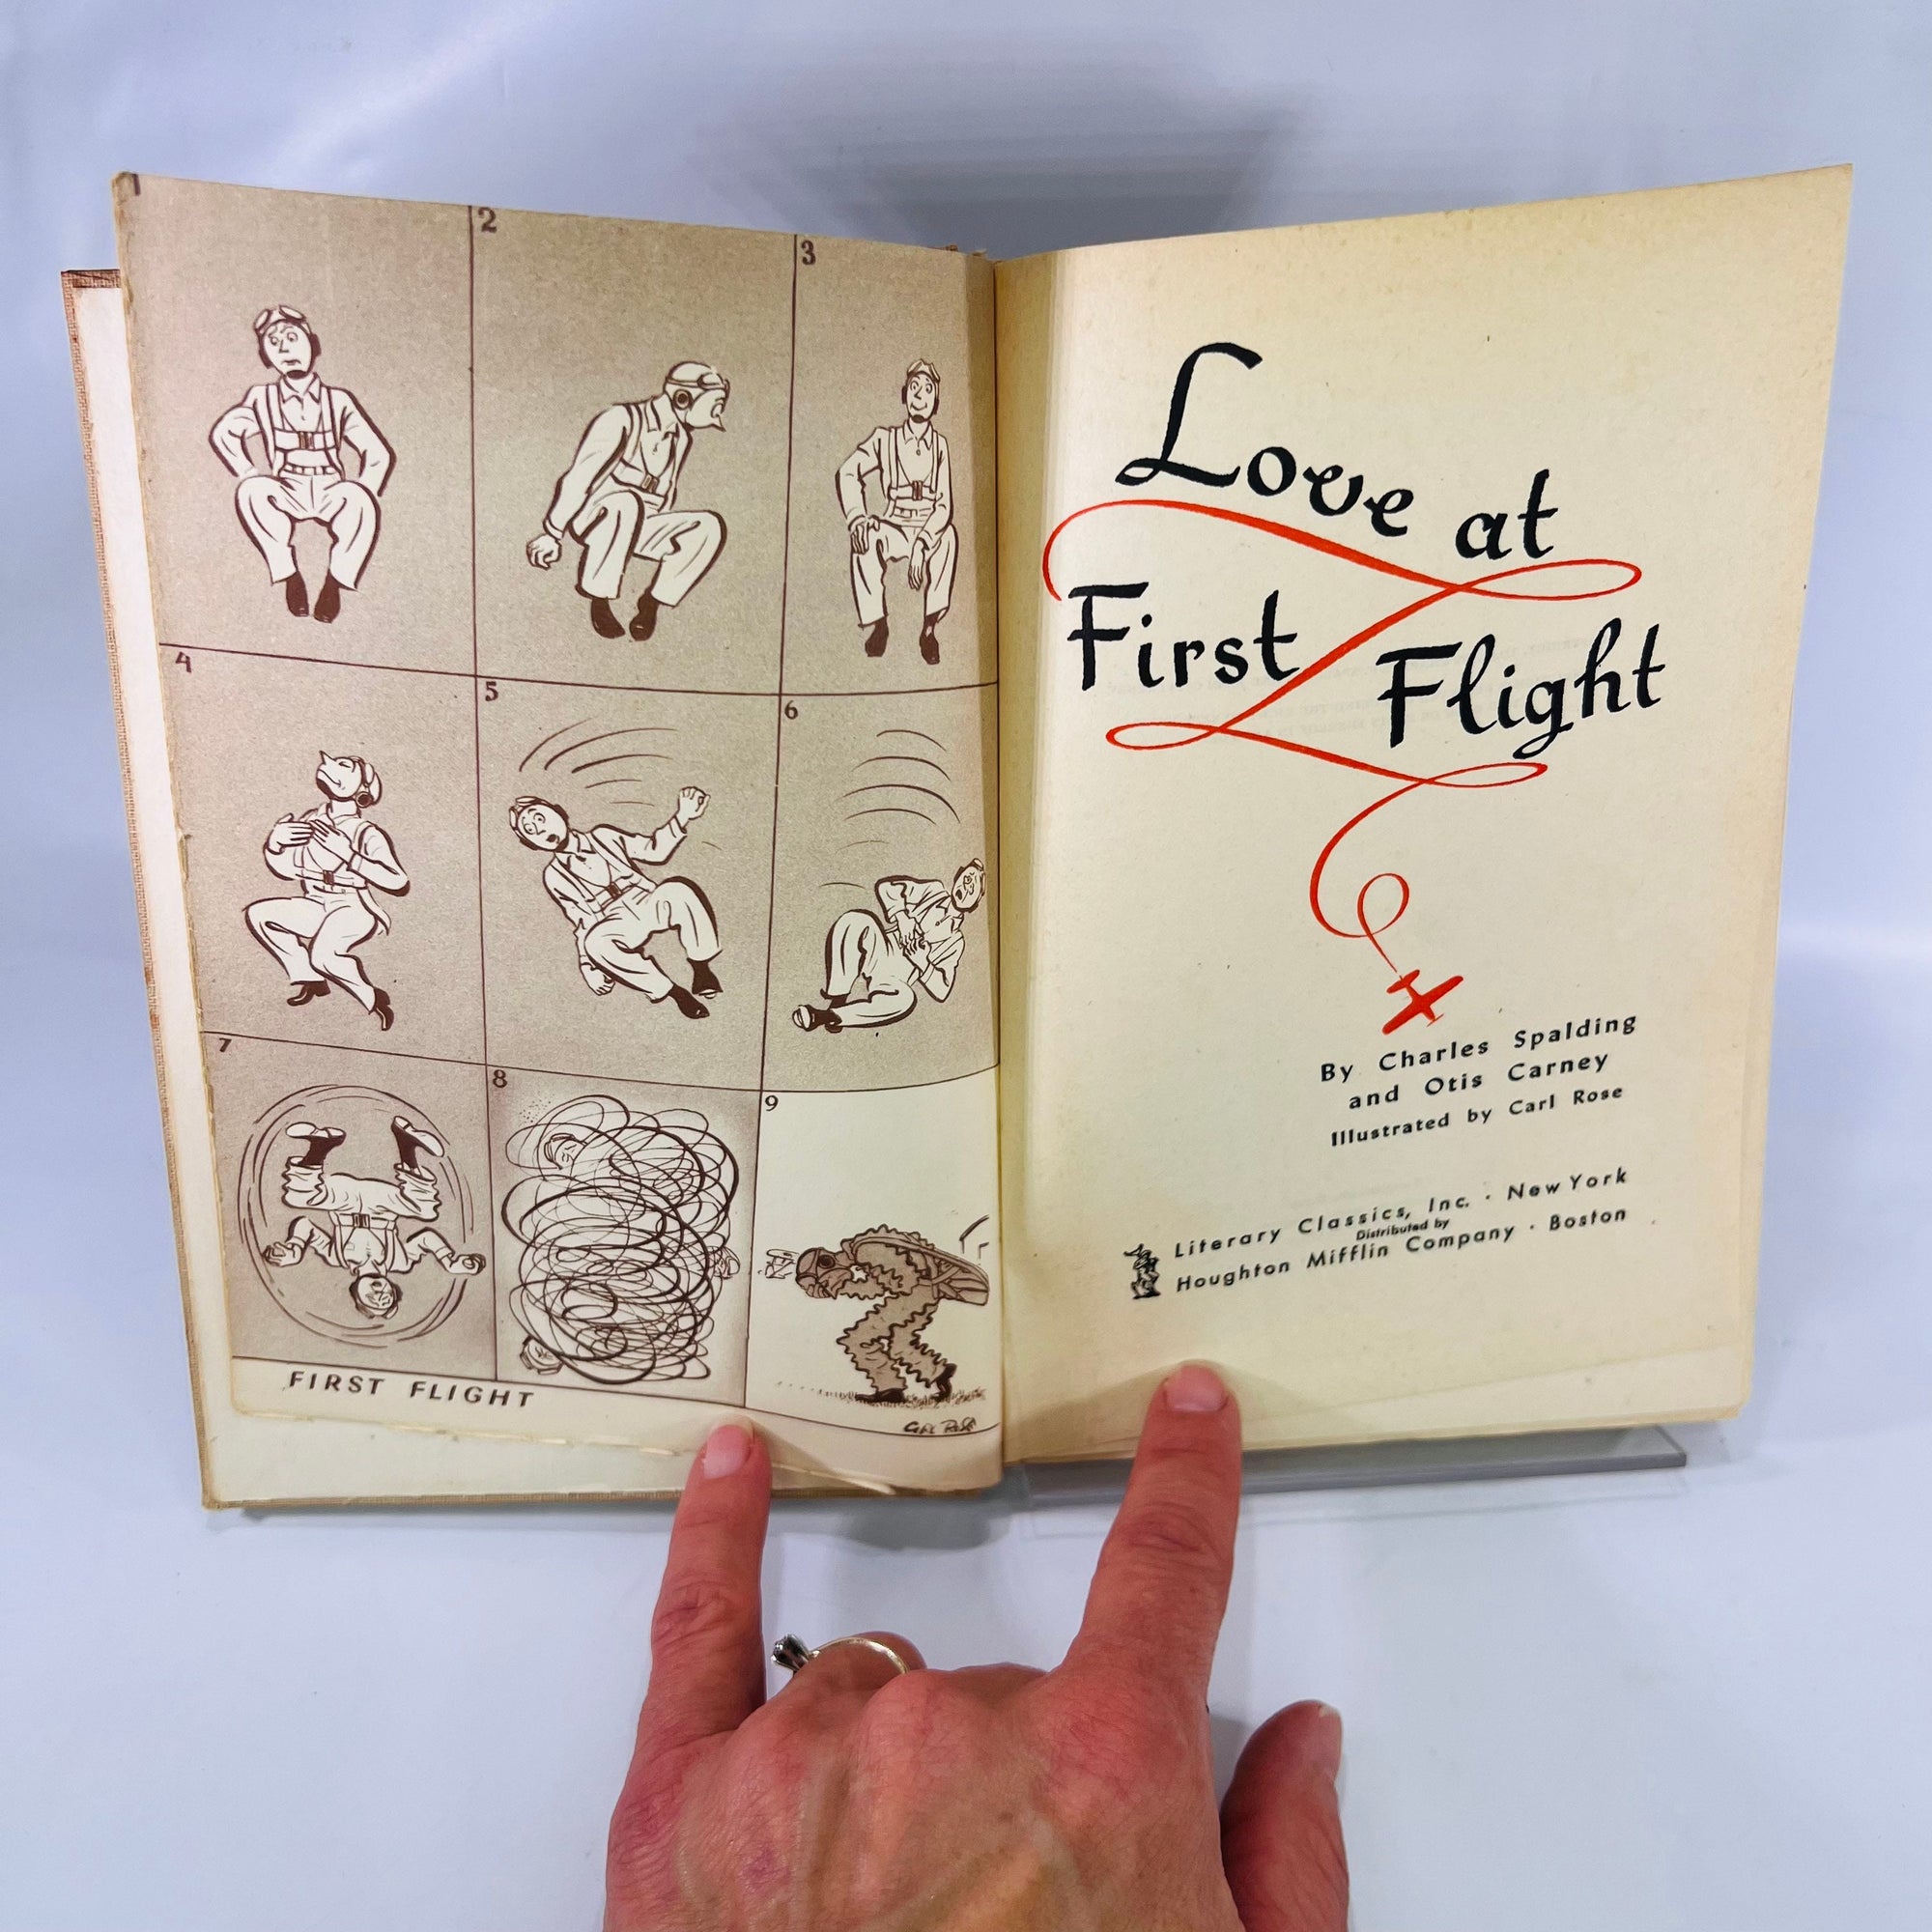 Love at First Flight by Charles Spalding illustrated by Carl Rose 1943 Houghton Mifflin Company Vintage Military Humor Book